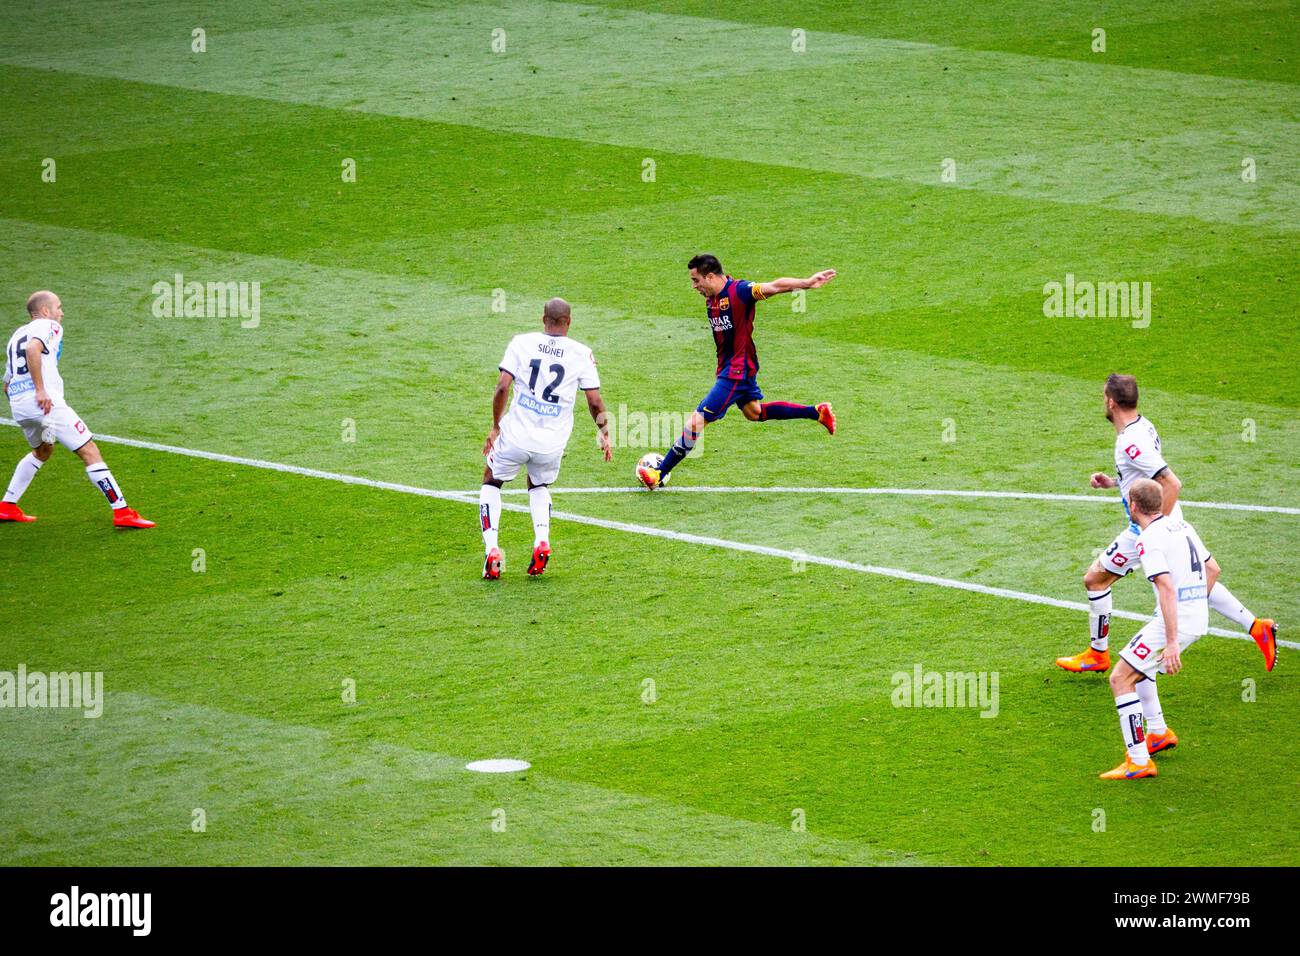 XAVI, FAREWELL GAME, BARCELONA FC, 2015: Xavi Hernandez of Barcelona takes a shot that flies just over the bar. The final game of the La Liga 2014-15 season in Spain between Barcelona FC and Deportivo de La Coruna at Camp Nou, Barcelona on May 23 2015. The Game finished 2-2. Barcelona celebrated winning the championship title and legend Xavi's final home game. Deportiva got the point they needed to avoid relegation. Photograph: Rob Watkins Stock Photo